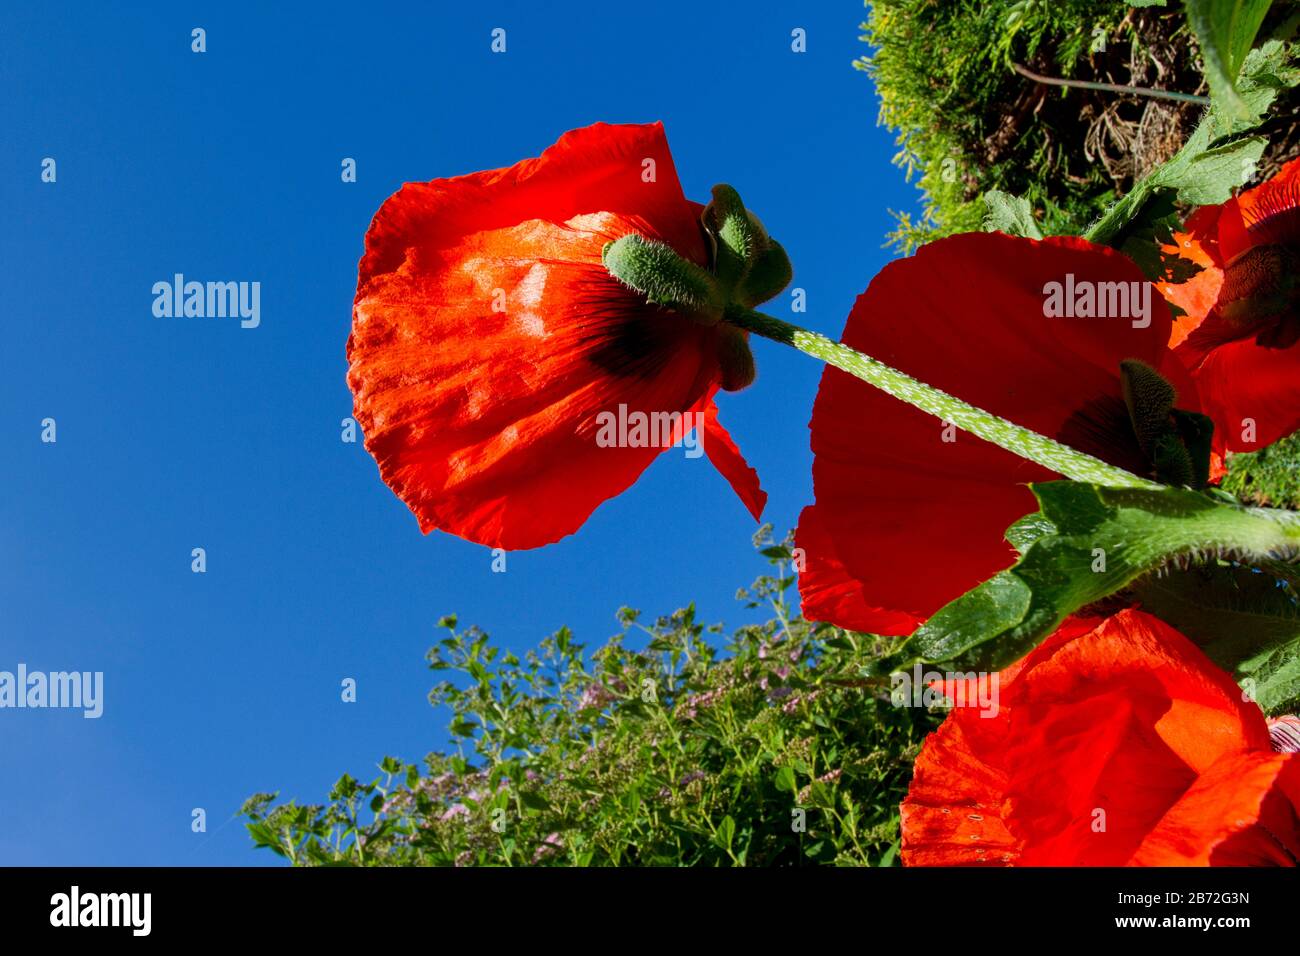 Red Poppies (Papaver rhoeas) in a garden in Nanaimo, Vancouver Island, BC, Canada in May Stock Photo